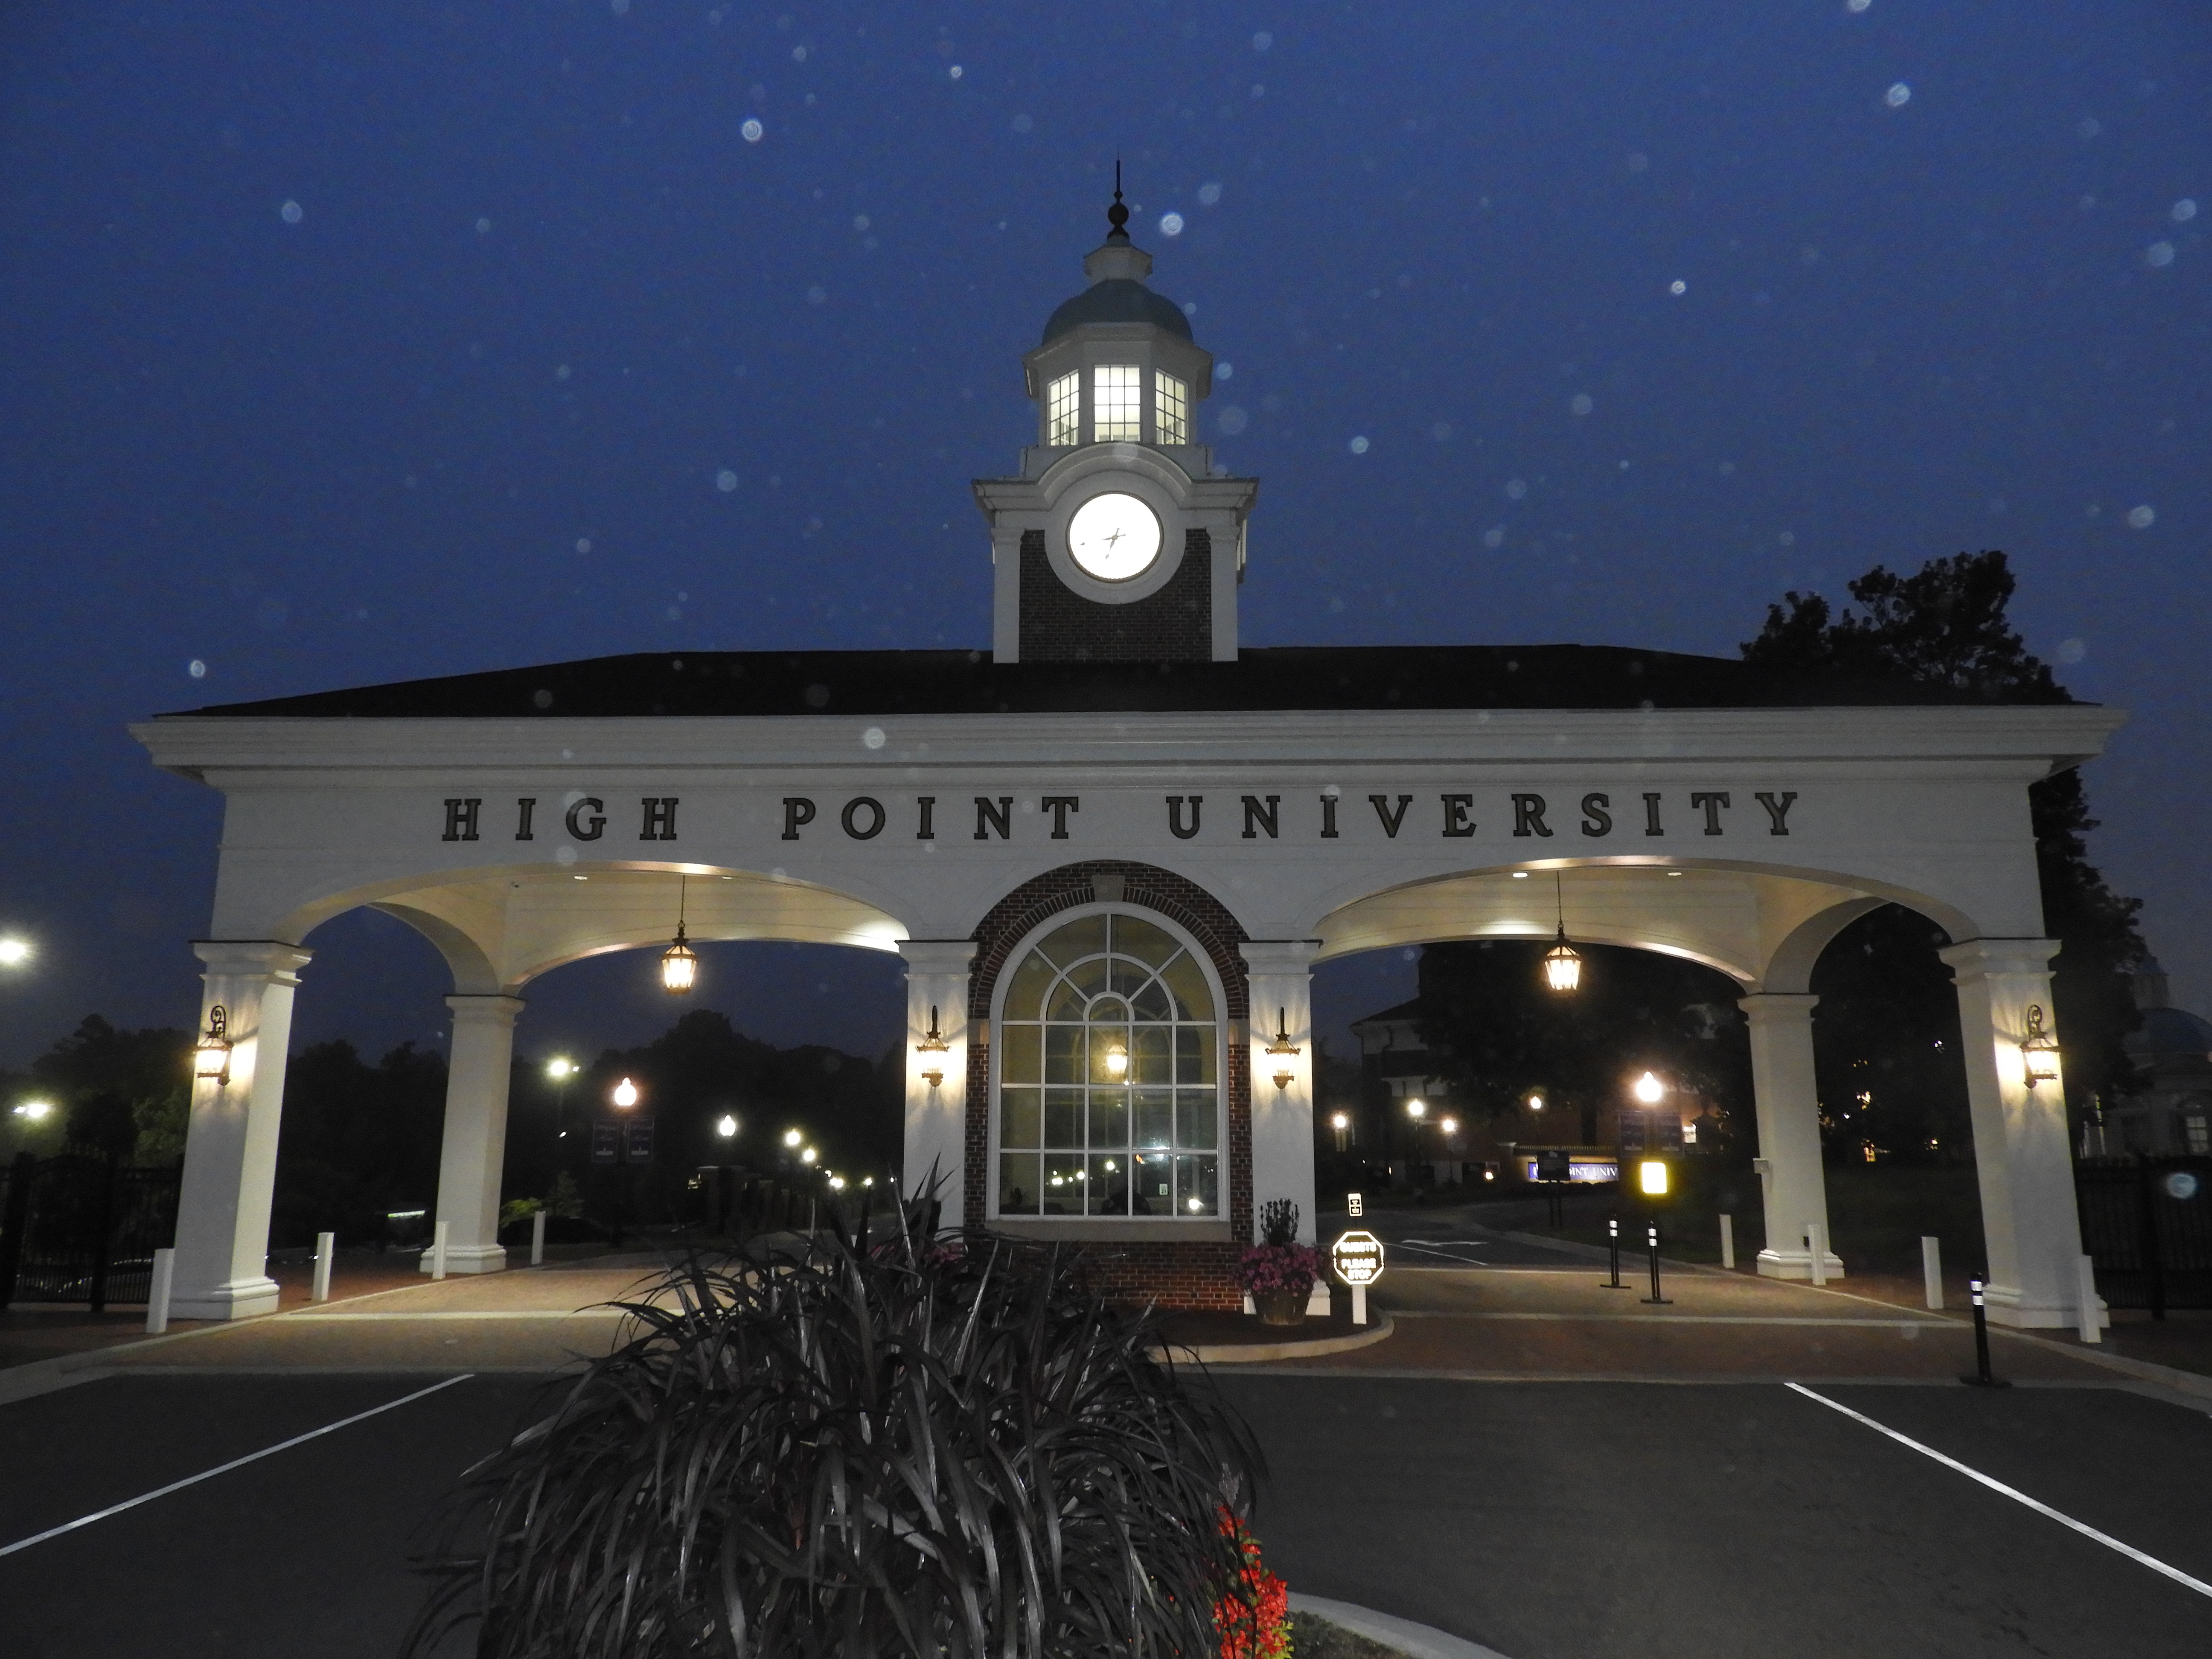 An entrance to High Point University in High Point North Carolina